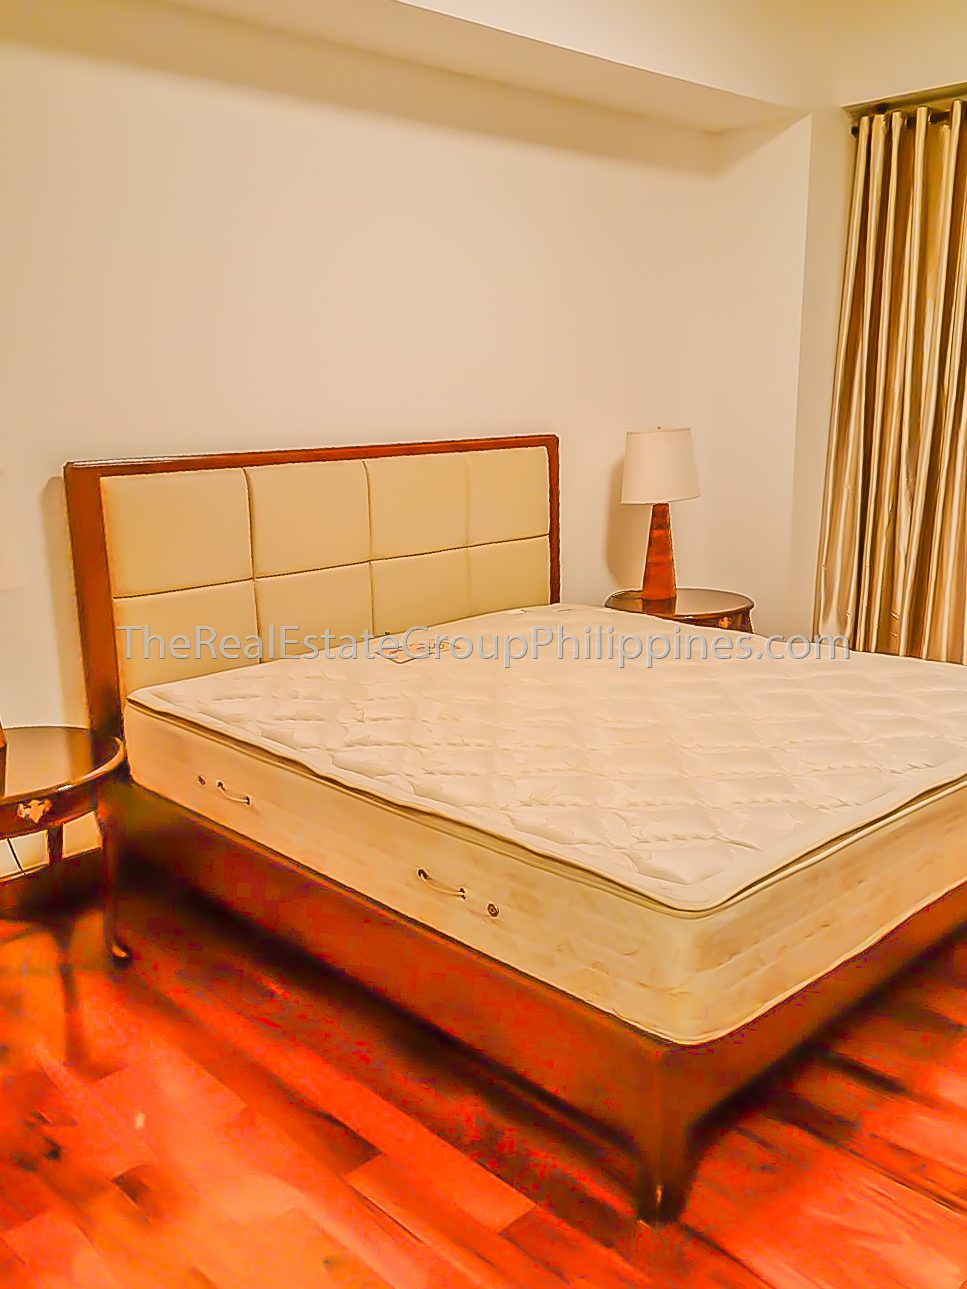 2BR Condo For Rent, The Shang Grand Tower, Legaspi Village, Makati-5